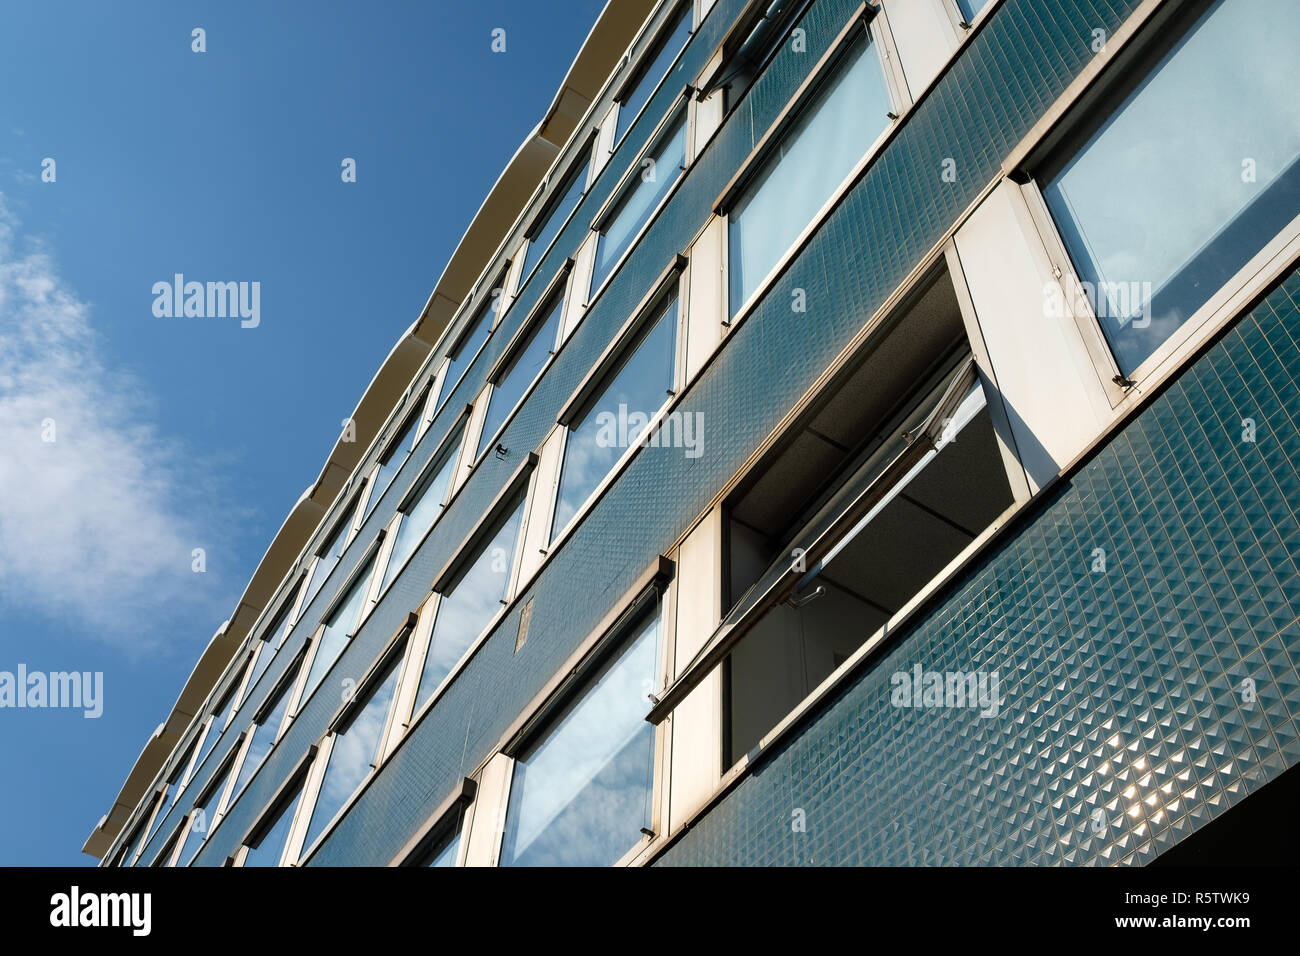 facade office building from the 6oer years Stock Photo